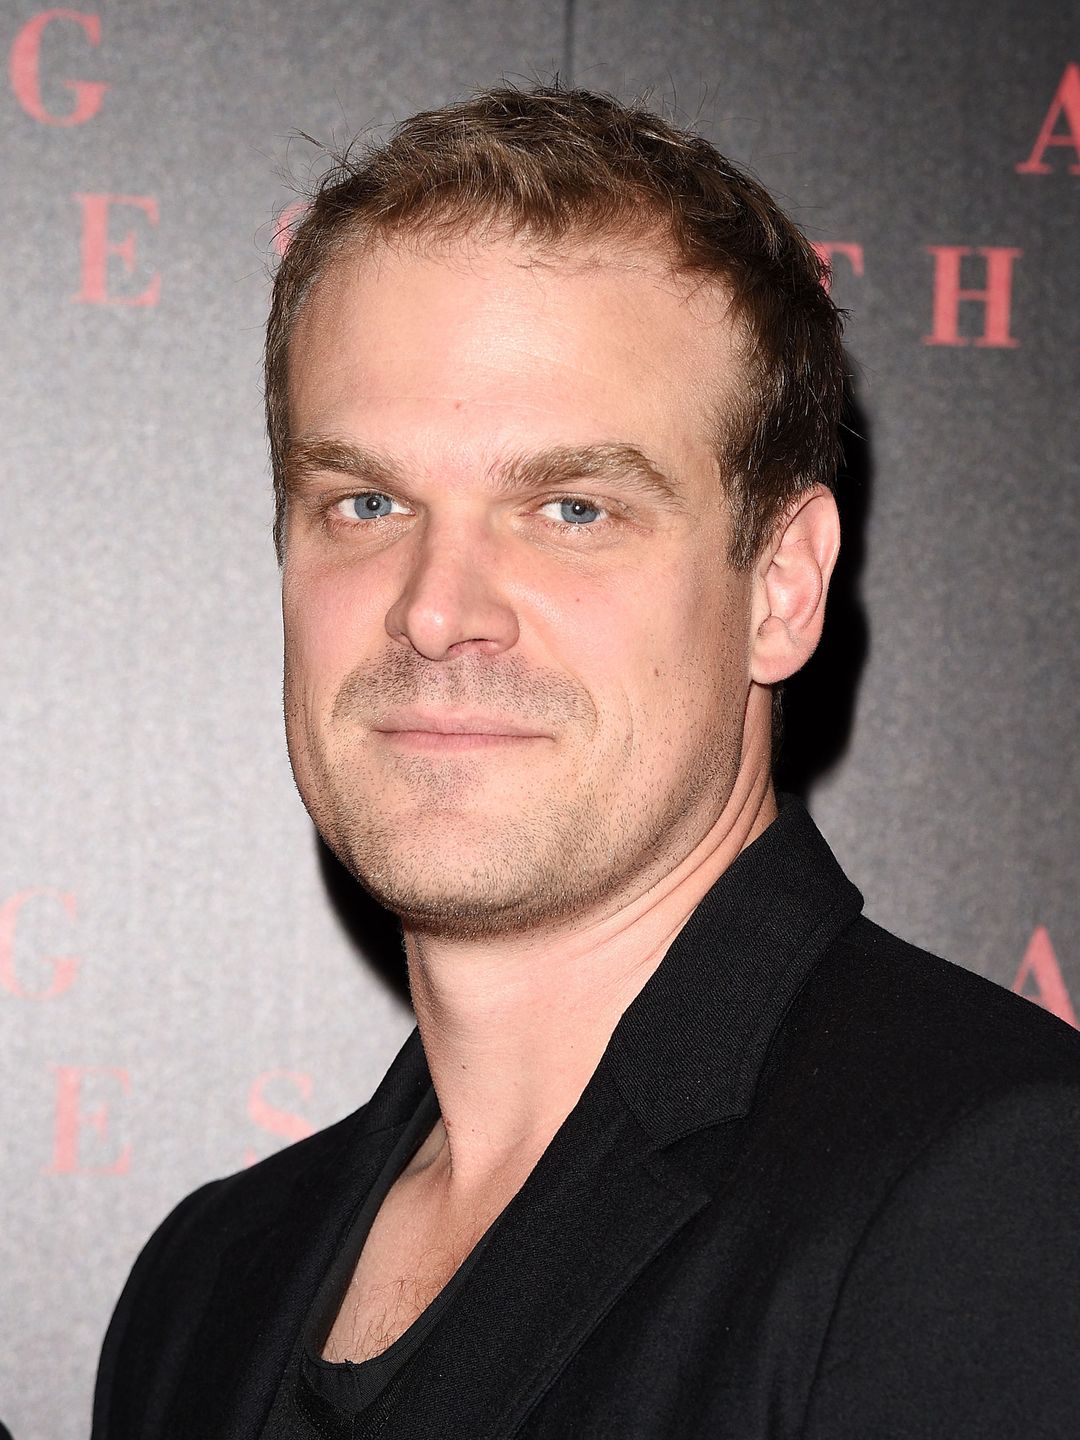 David Harbour who are his parents